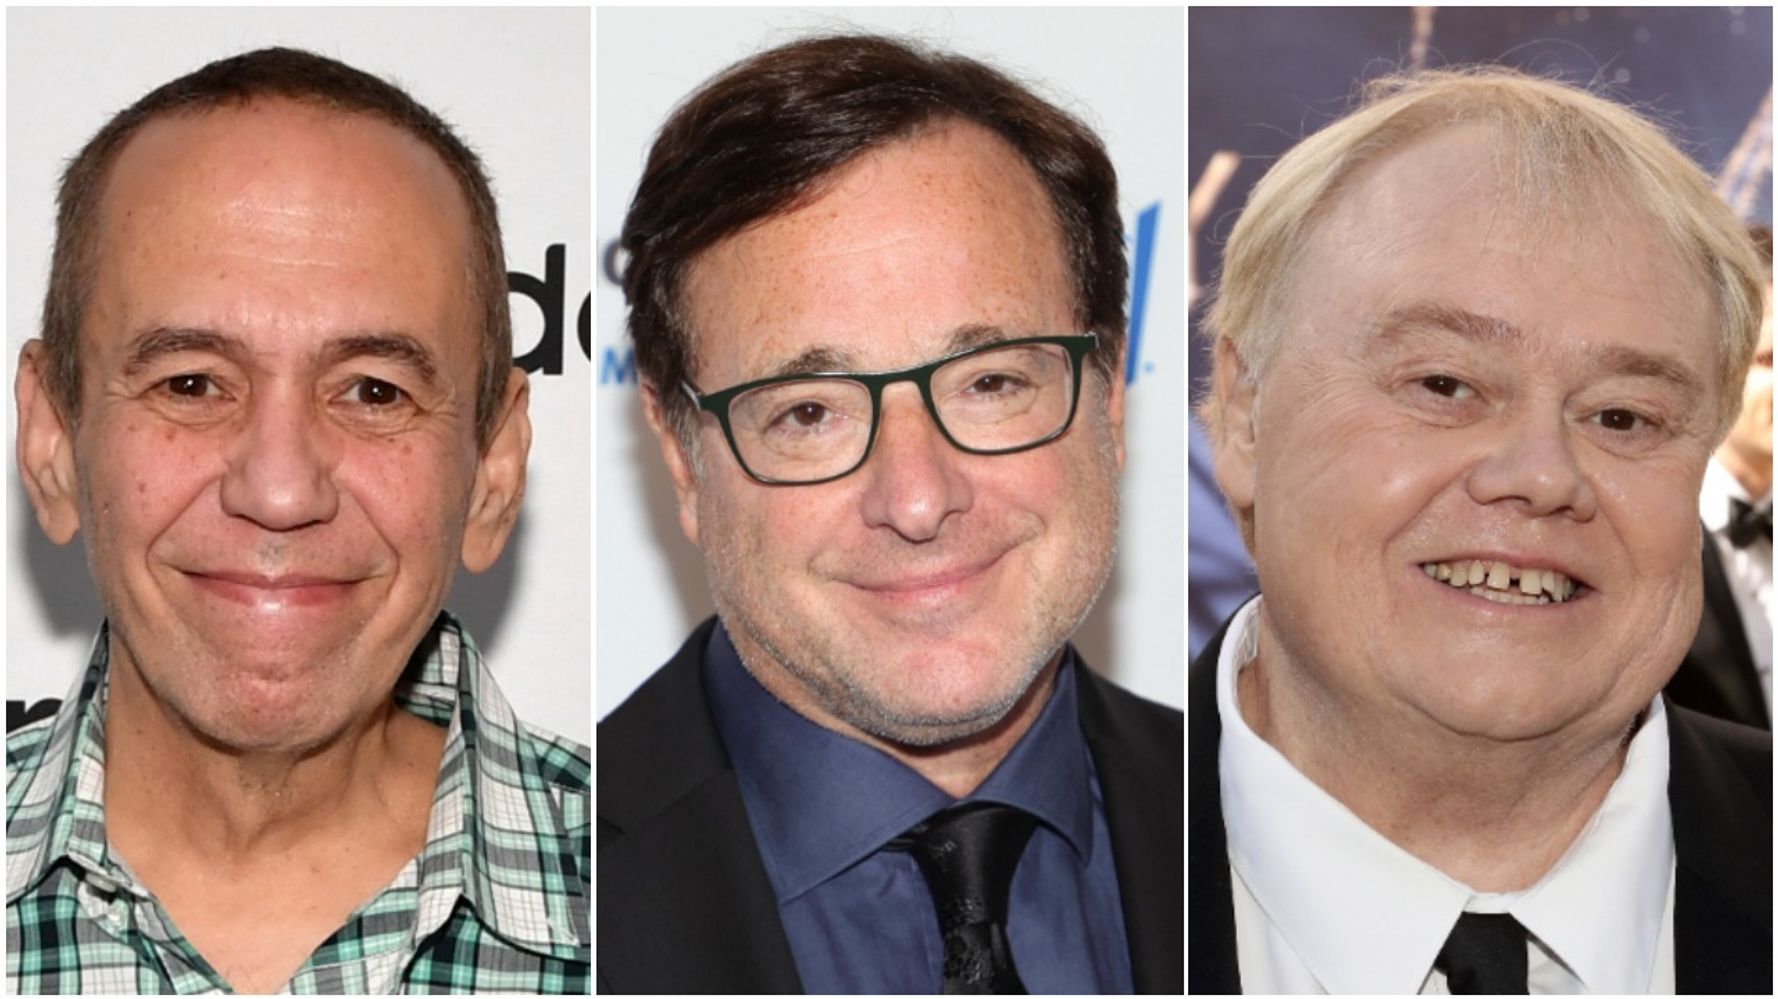 Viral Photo Of Gilbert Gottfried, Bob Saget And Louie Anderson Has A Tragic Backstory